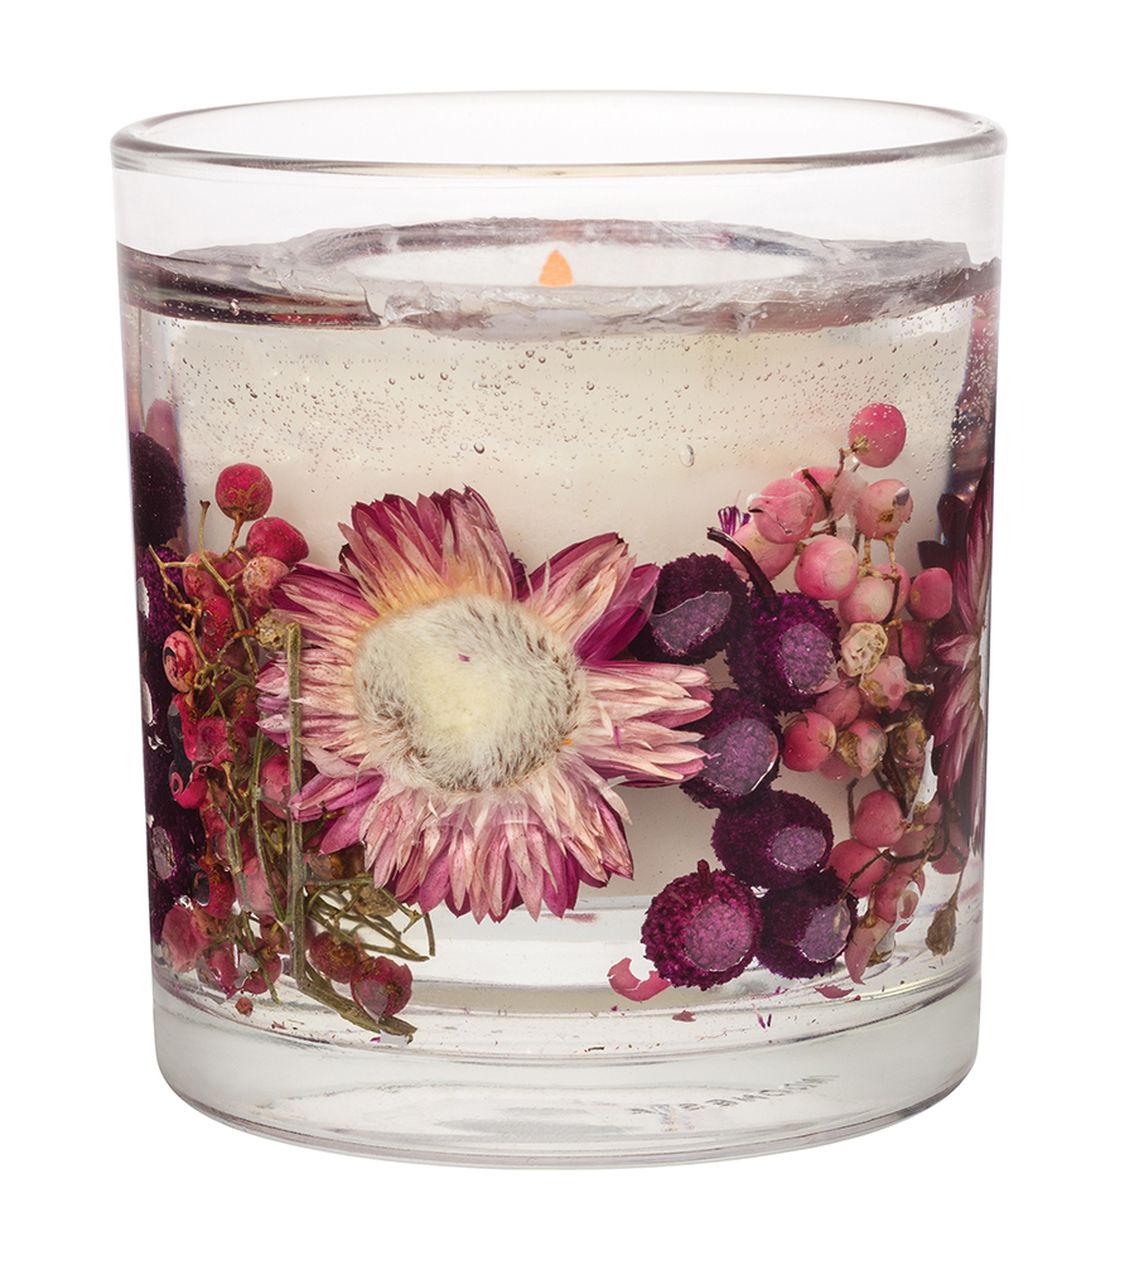 Blackberry Bay Stoneglow Scented Natural Wax Botanical Candle - 30 Hour